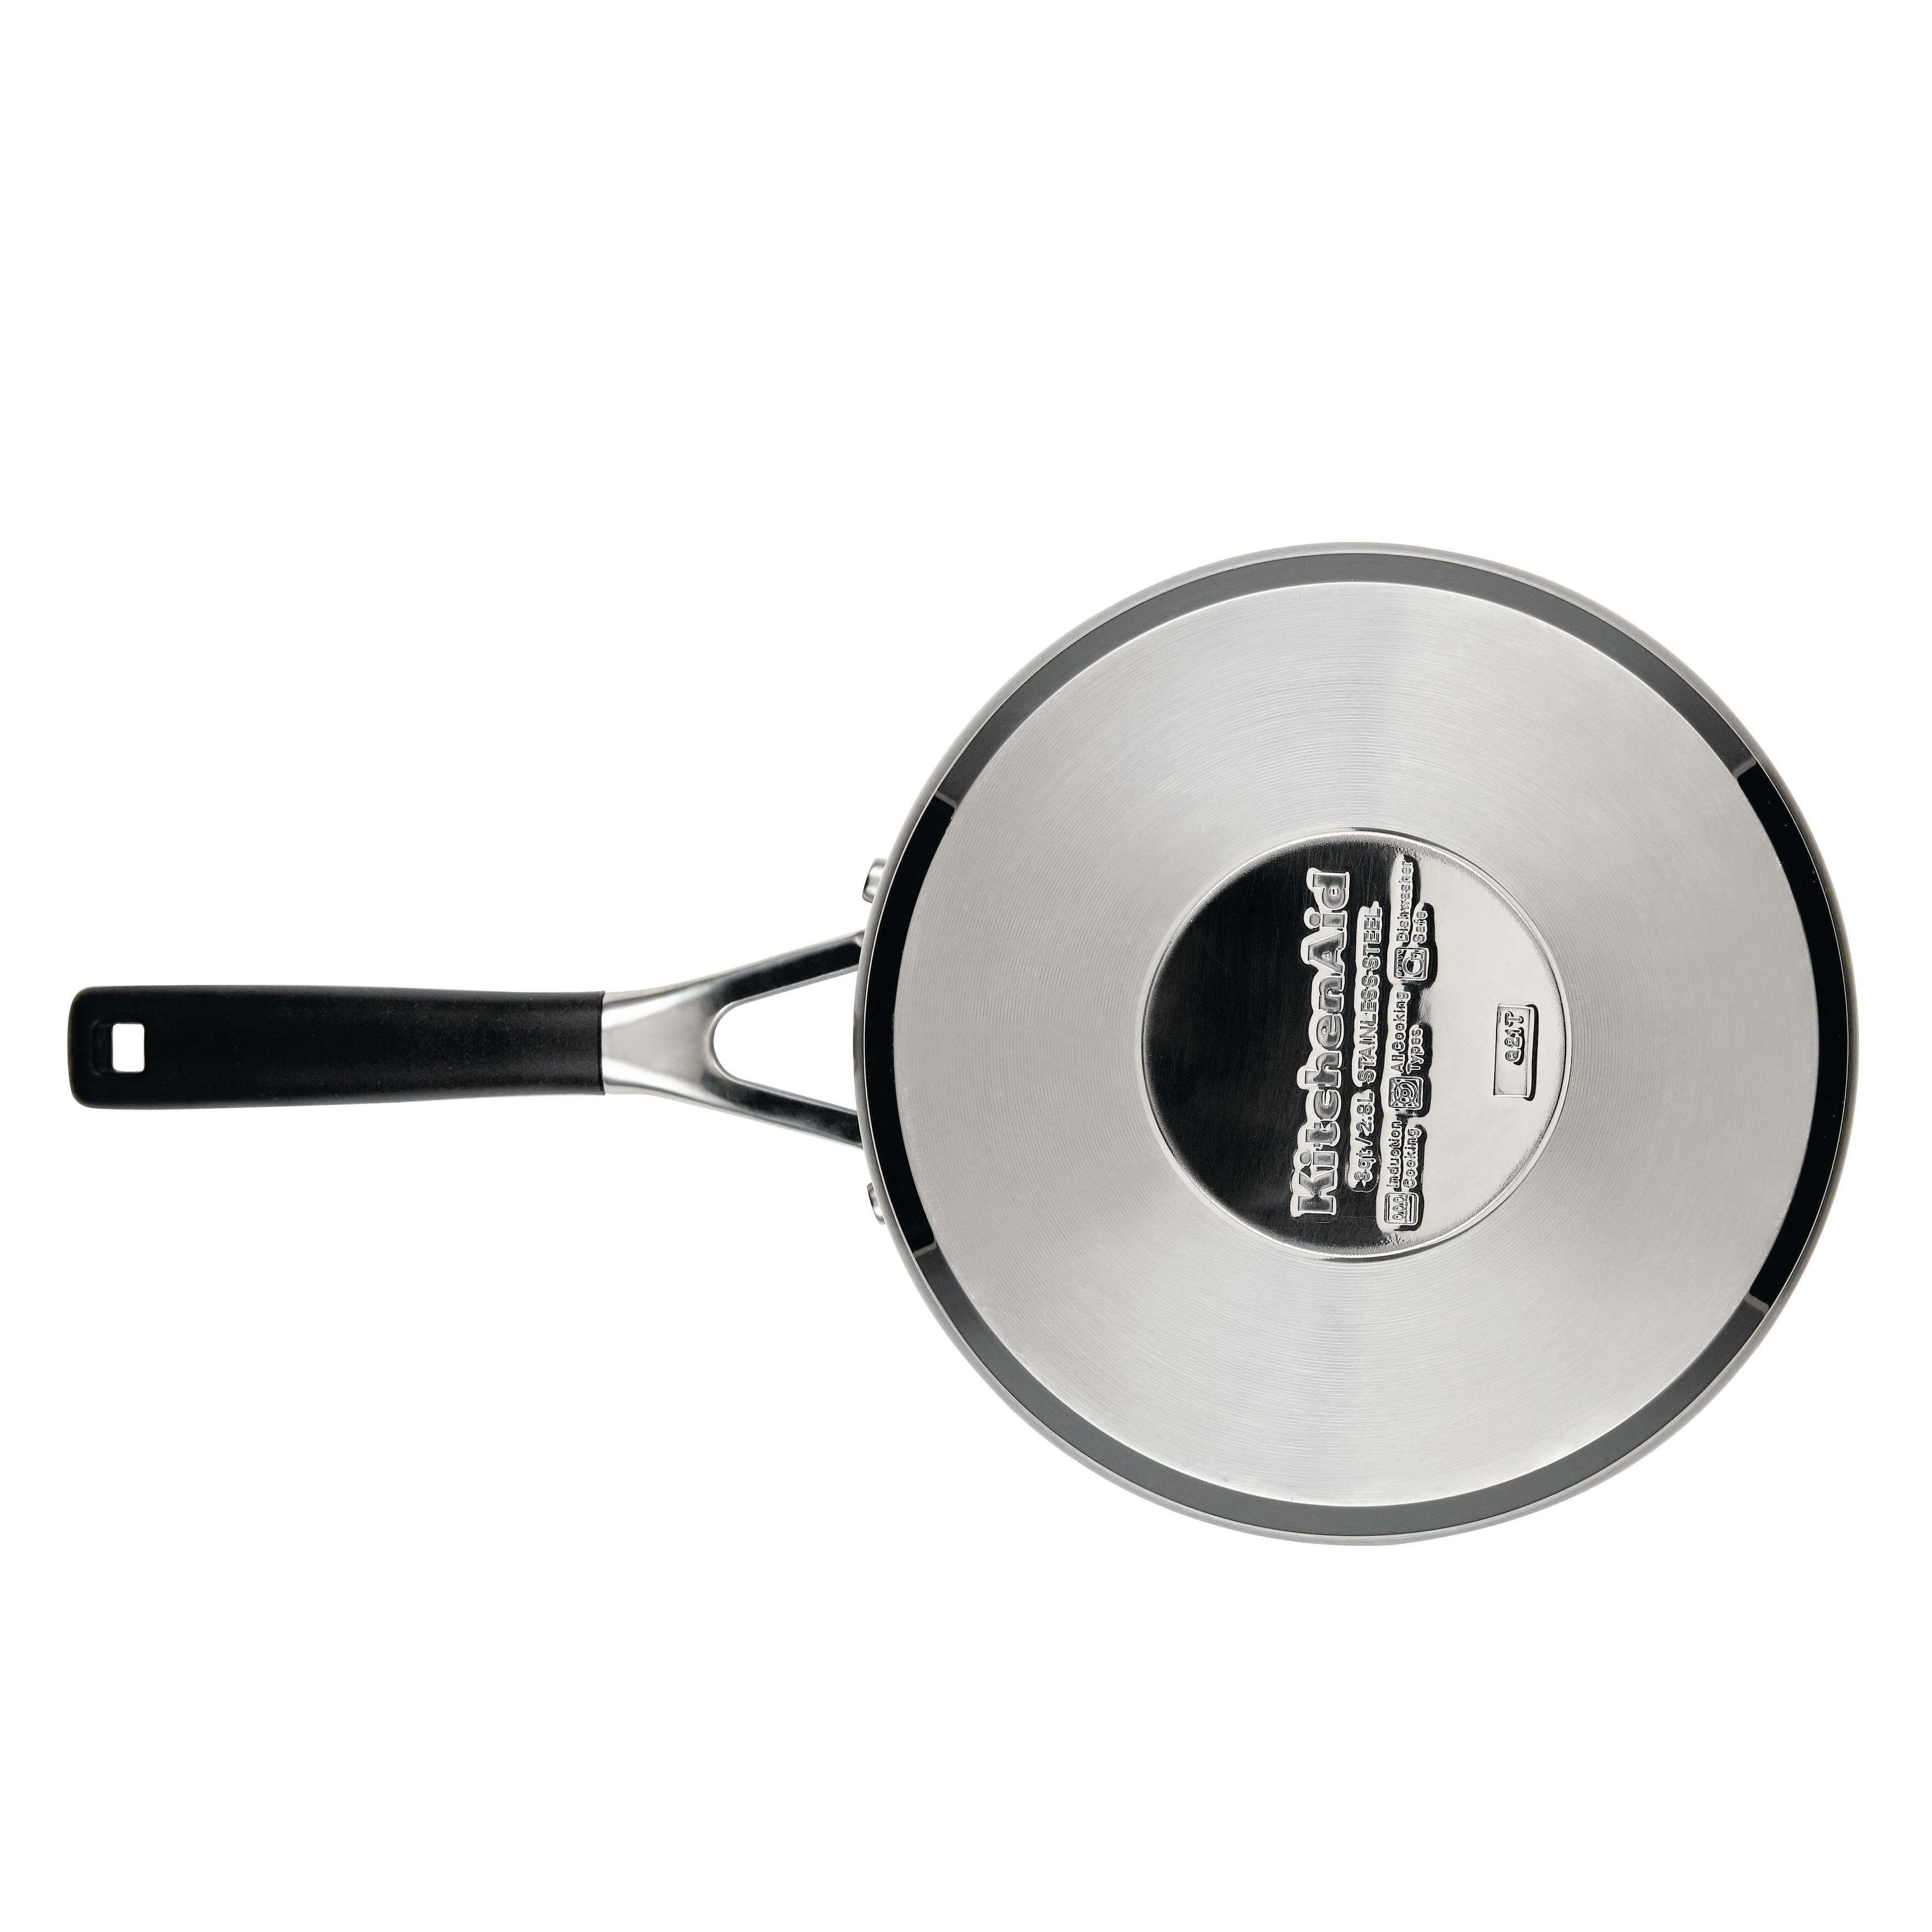 KitchenAid Stainless Steel Induction Frying Pan, 12 inch, Brushed Stainless  Steel